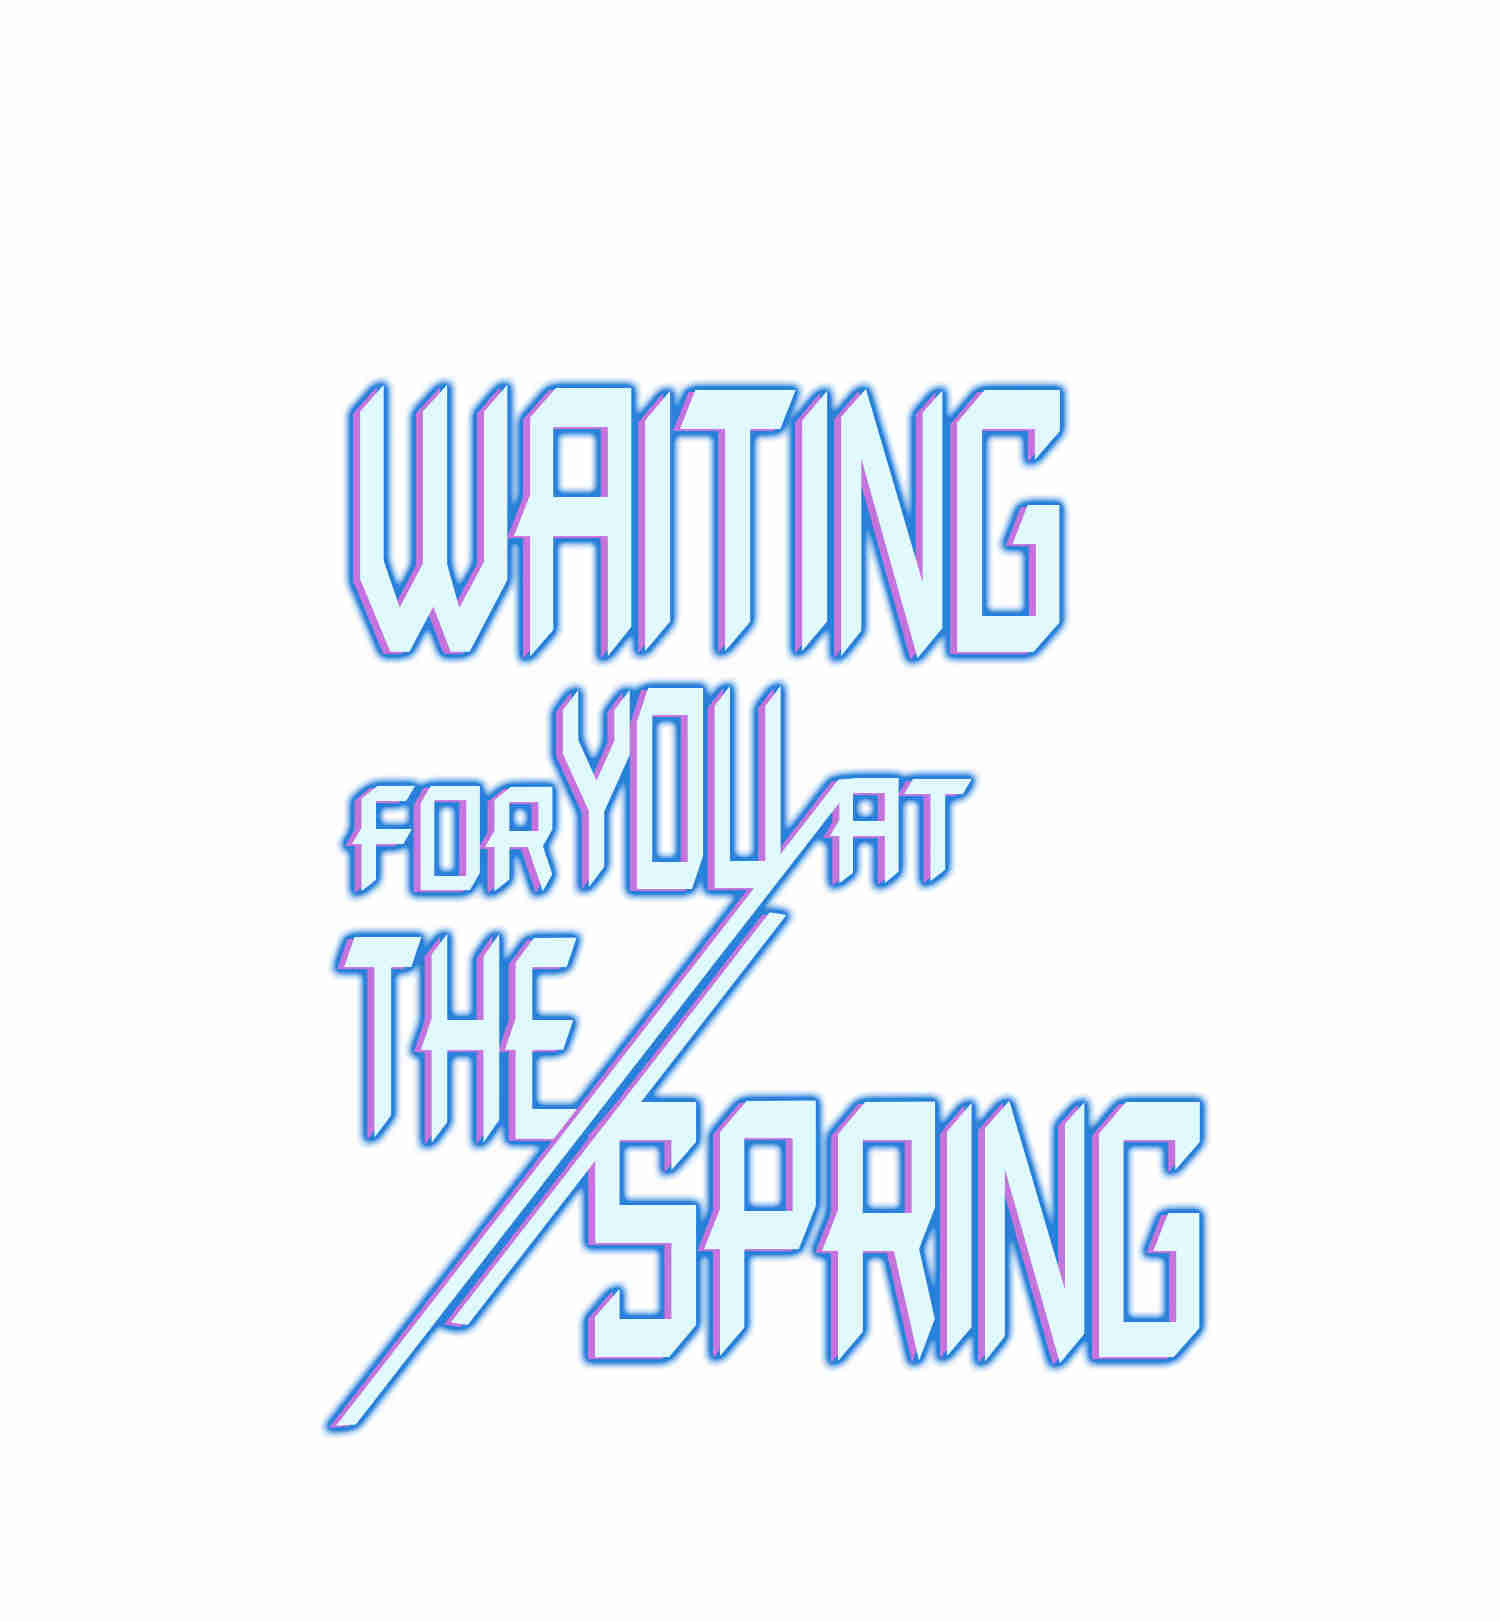 Waiting For You At The Spring - Page 1